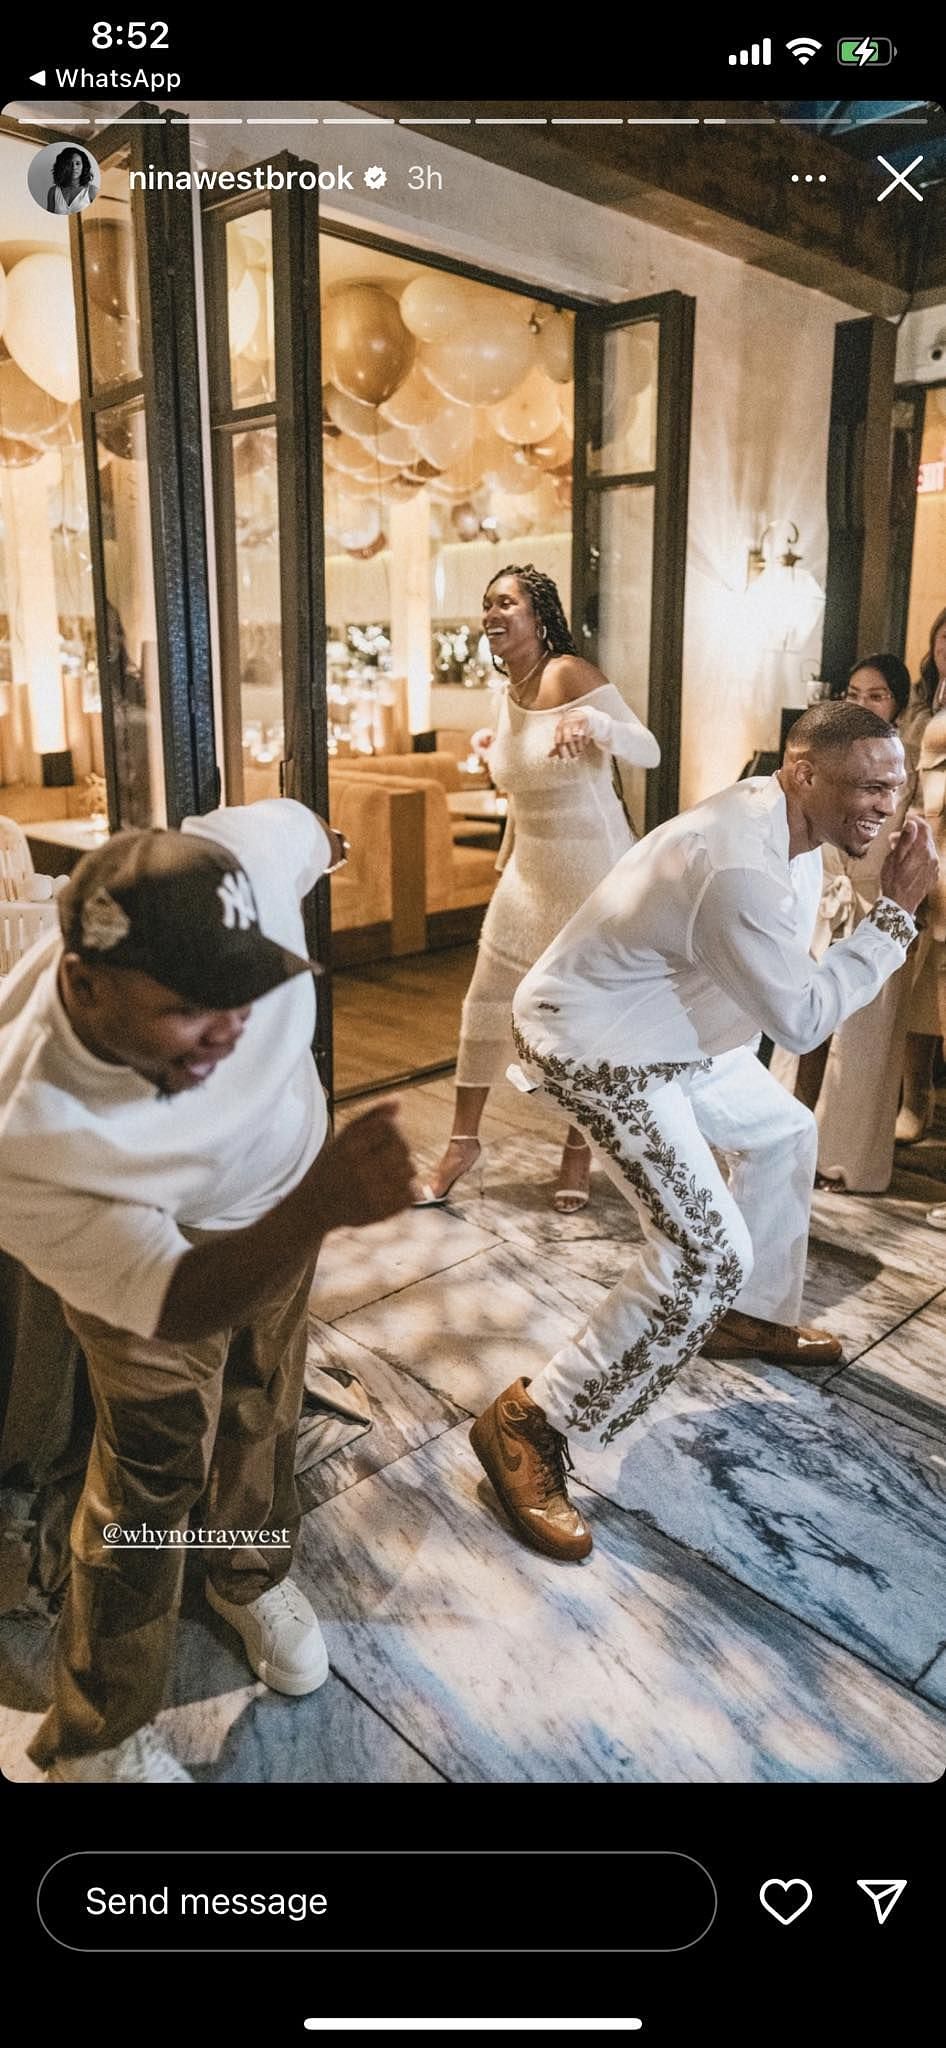 Russell and Nina Westbrook dance the night away in Los Angeles